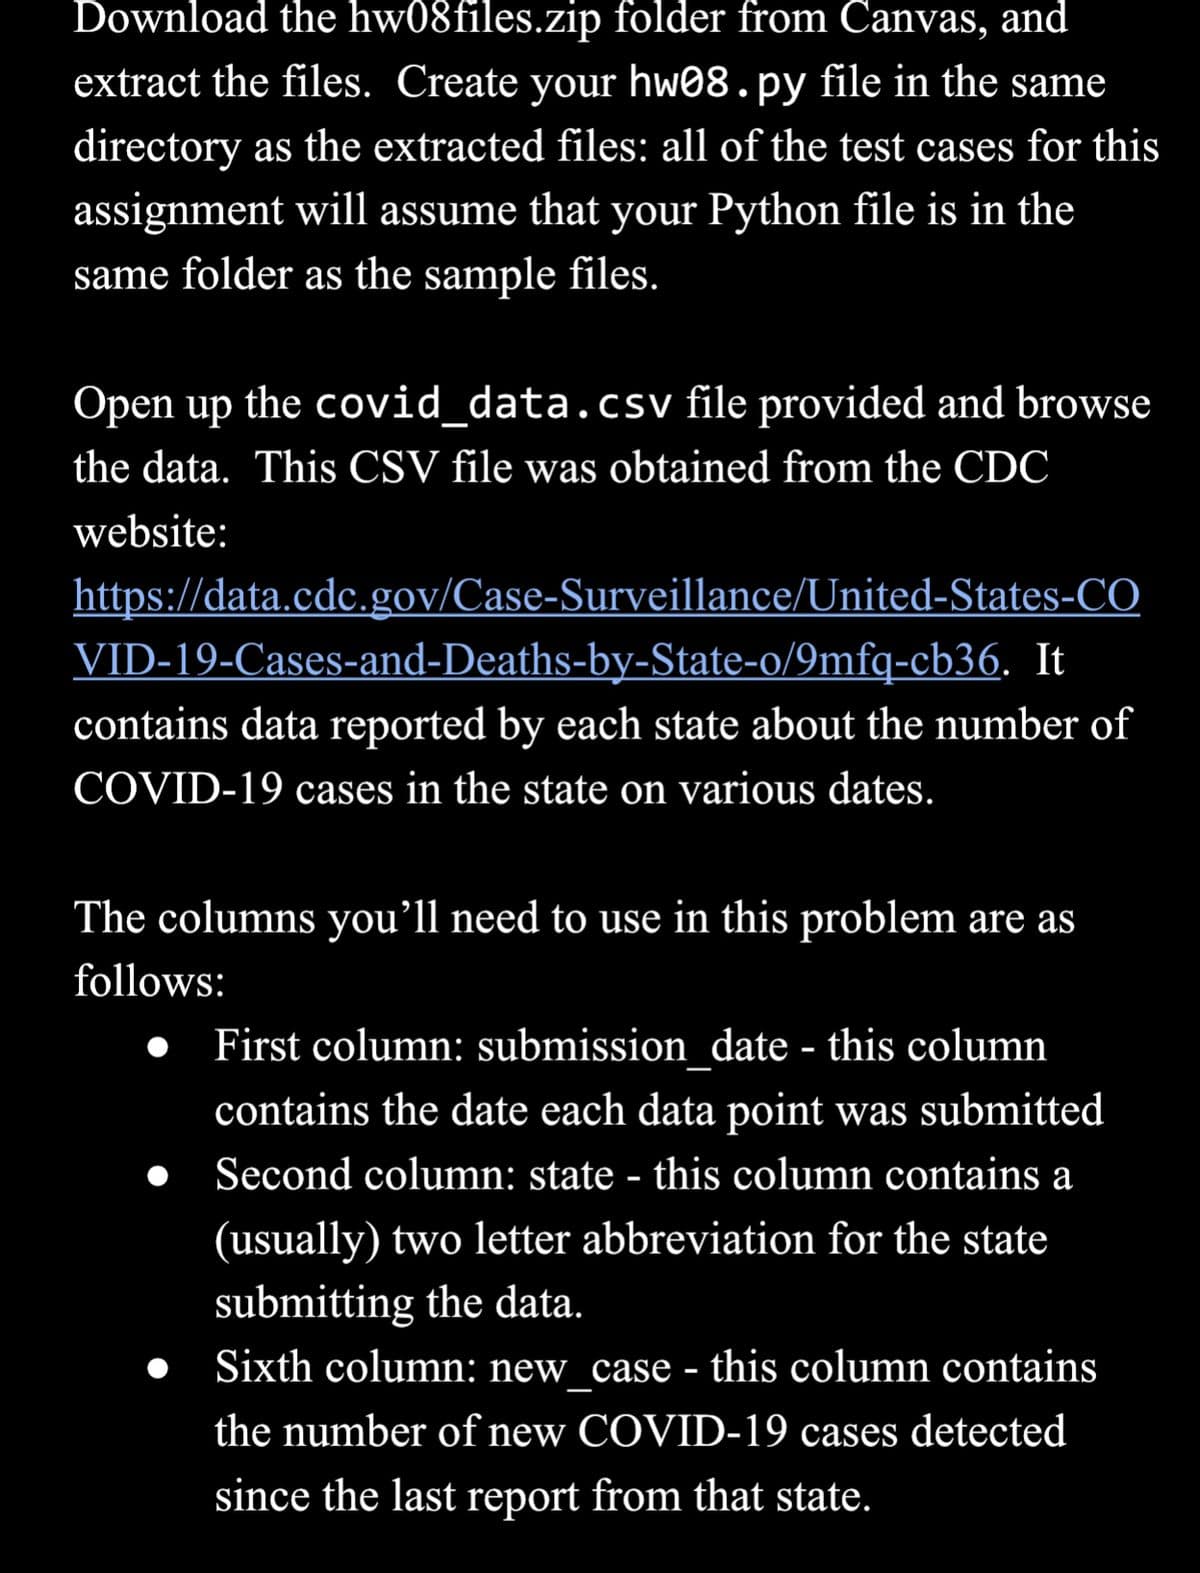 Download the hw08files.zip folder from Canvas, and
extract the files. Create your hw08.py file in the same
directory as the extracted files: all of the test cases for this
assignment will assume that your Python file is in the
same folder as the sample files.
Open up the covid_data.csv file provided and browse
the data. This CSV file was obtained from the CDC
website:
https://data.cdc.gov/Case-Surveillance/United-States-CO
VID-19-Cases-and-Deaths-by-State-o/9mfq-cb36. It
contains data reported by each state about the number of
COVID-19 cases in the state on various dates.
The columns you'll need to use in this problem are as
follows:
•
First column: submission date - this column
contains the date each data point was submitted
Second column: state - this column contains a
(usually) two letter abbreviation for the state
submitting the data.
Sixth column: new case - this column contains
the number of new COVID-19 cases detected
since the last report from that state.